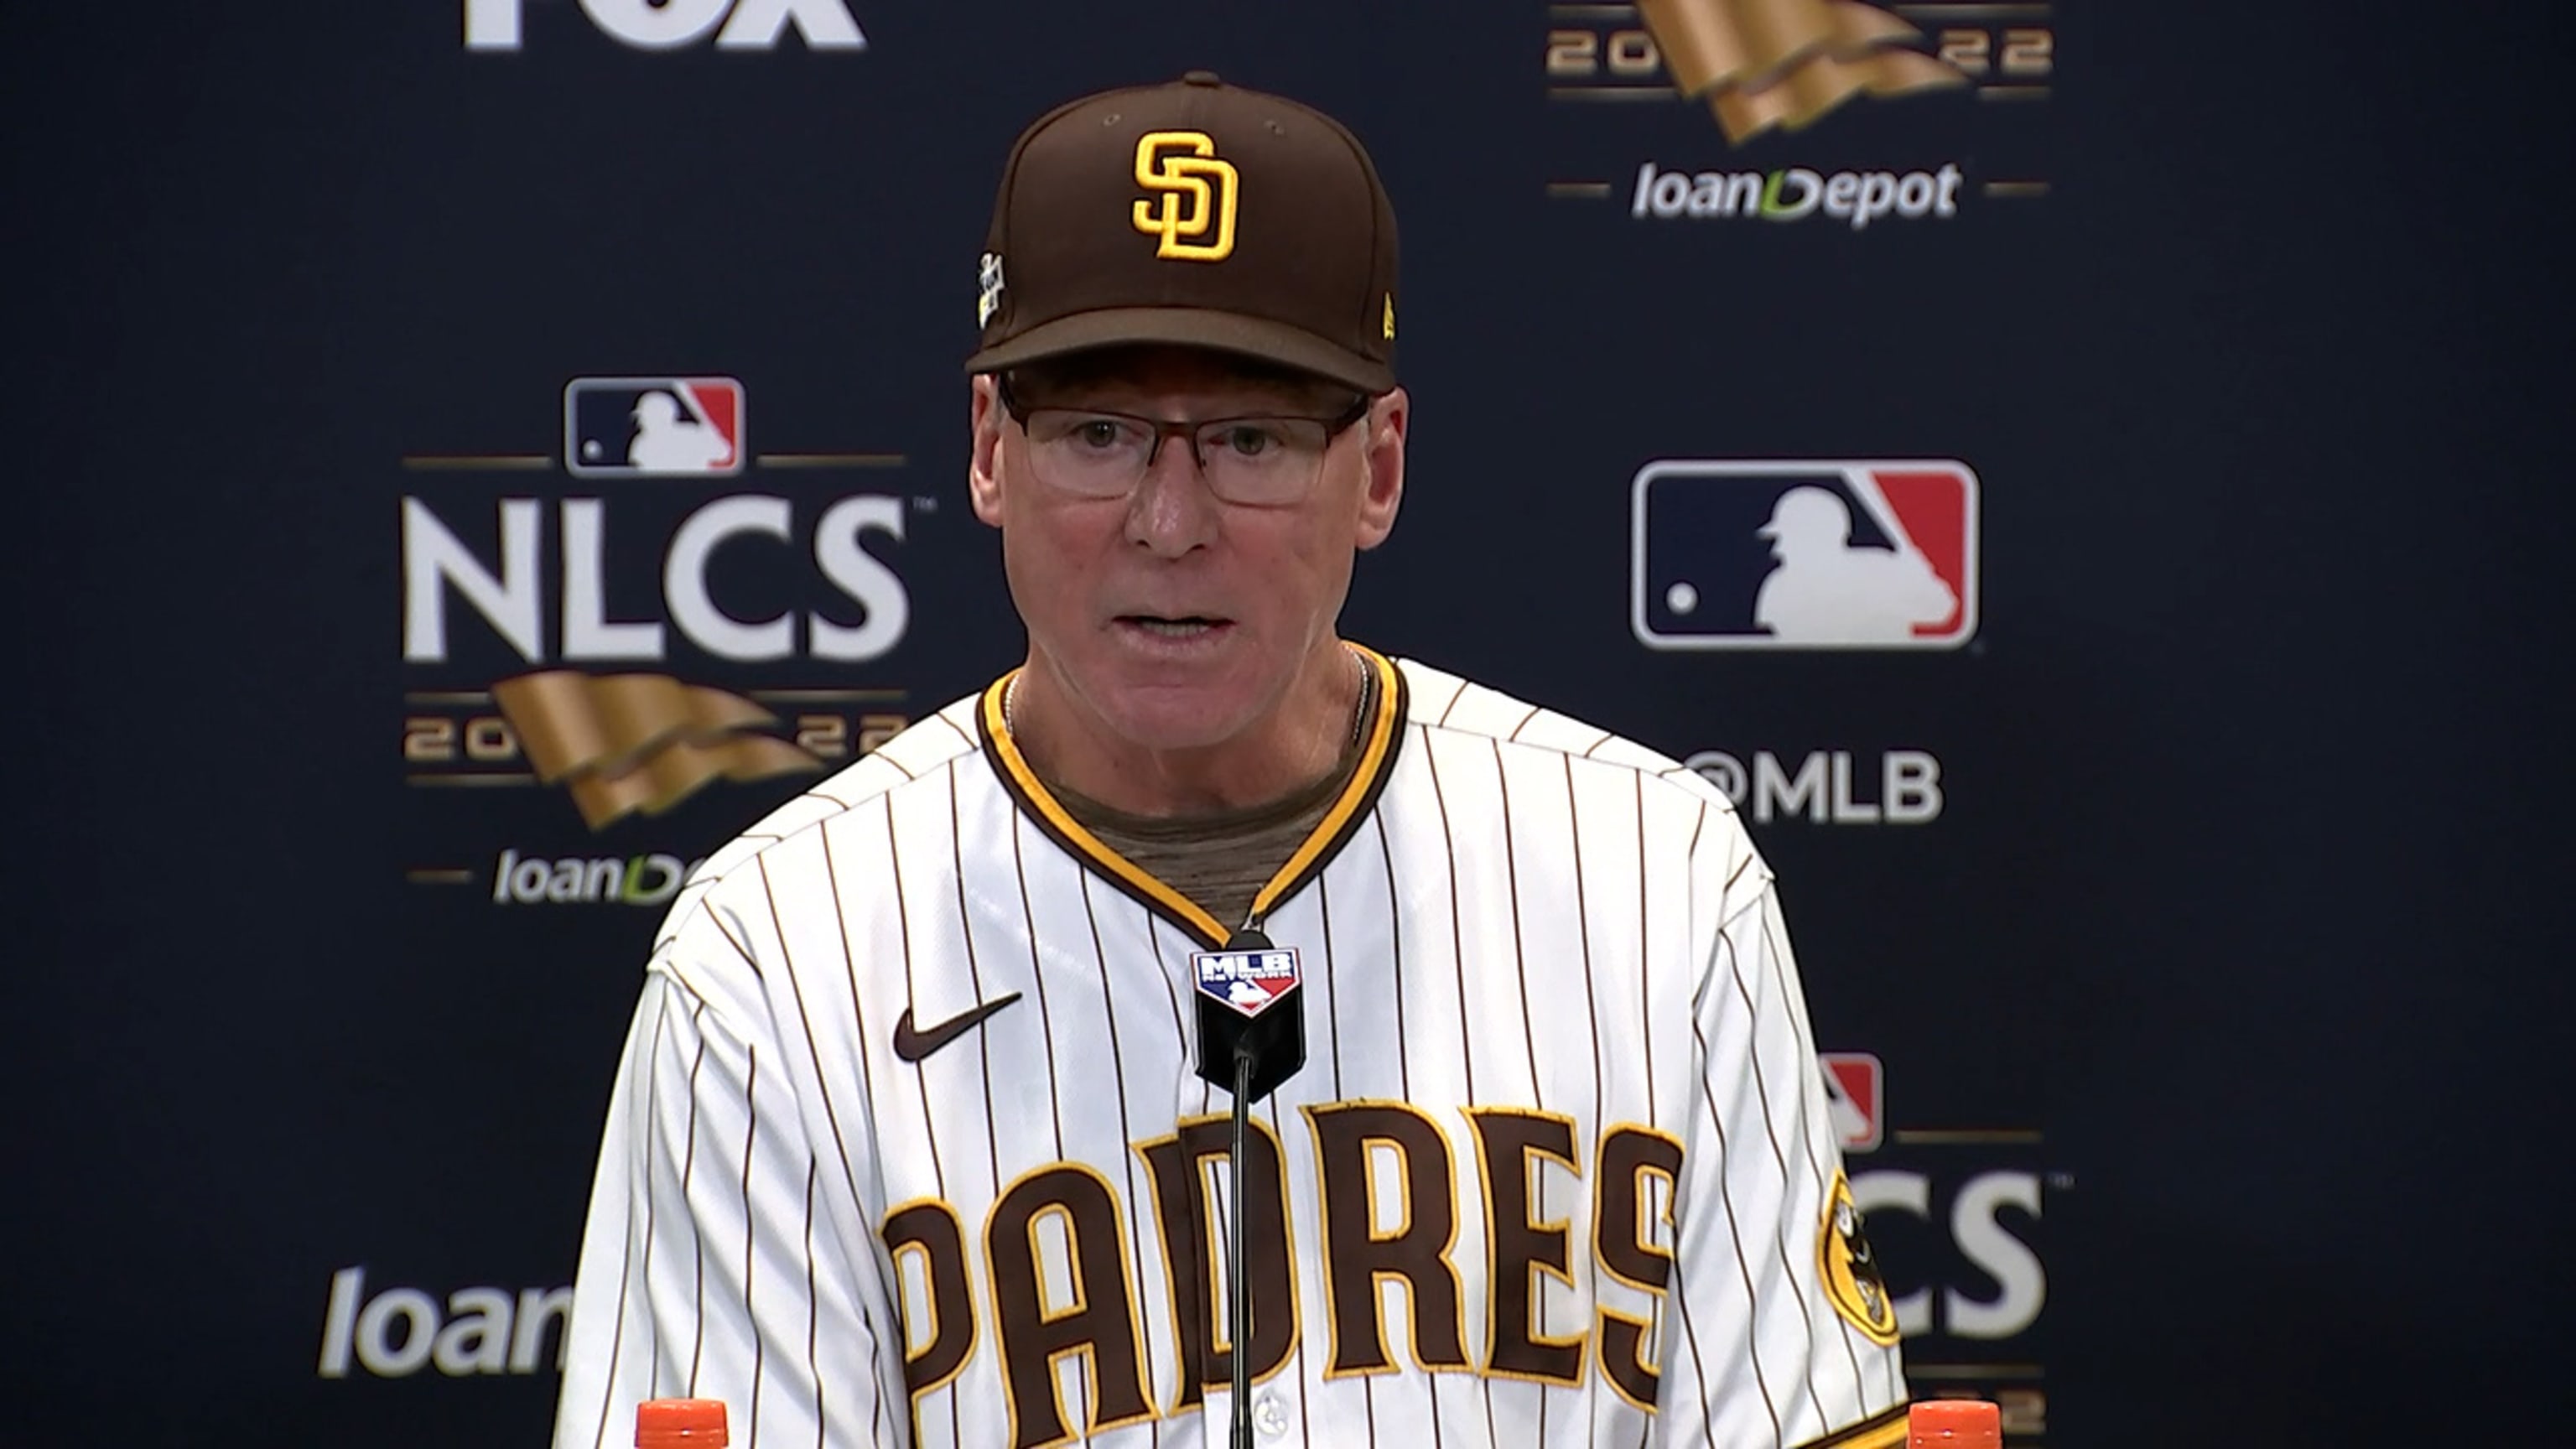 Padres News: Bob Melvin Doesn't Want Team's Record to be Main